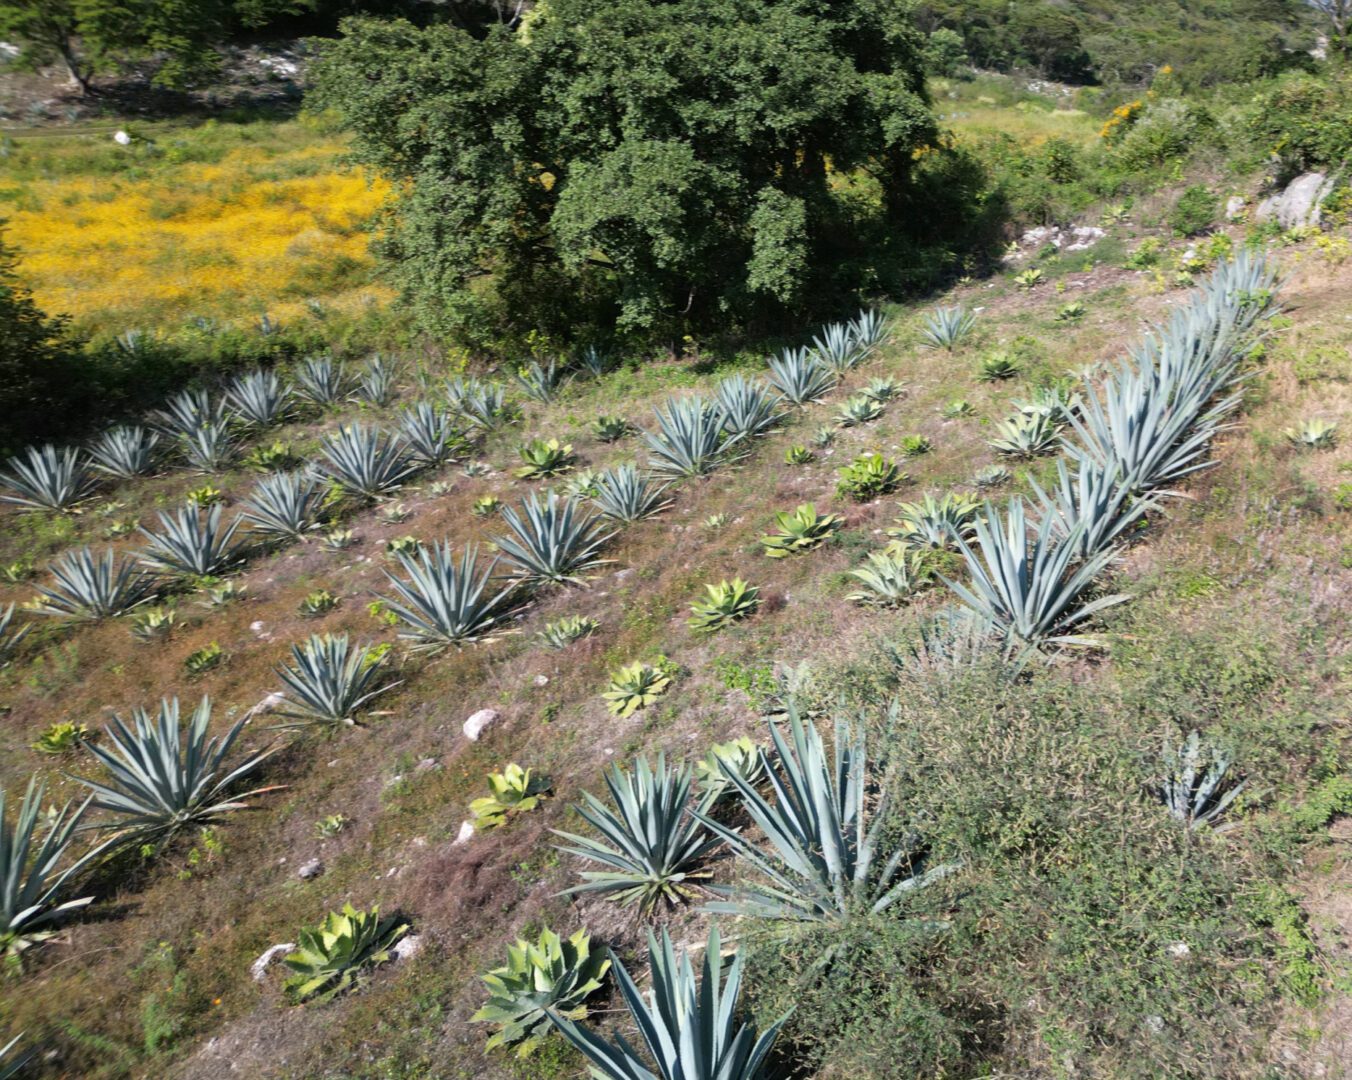 A field of agave plants in the middle of a forest.